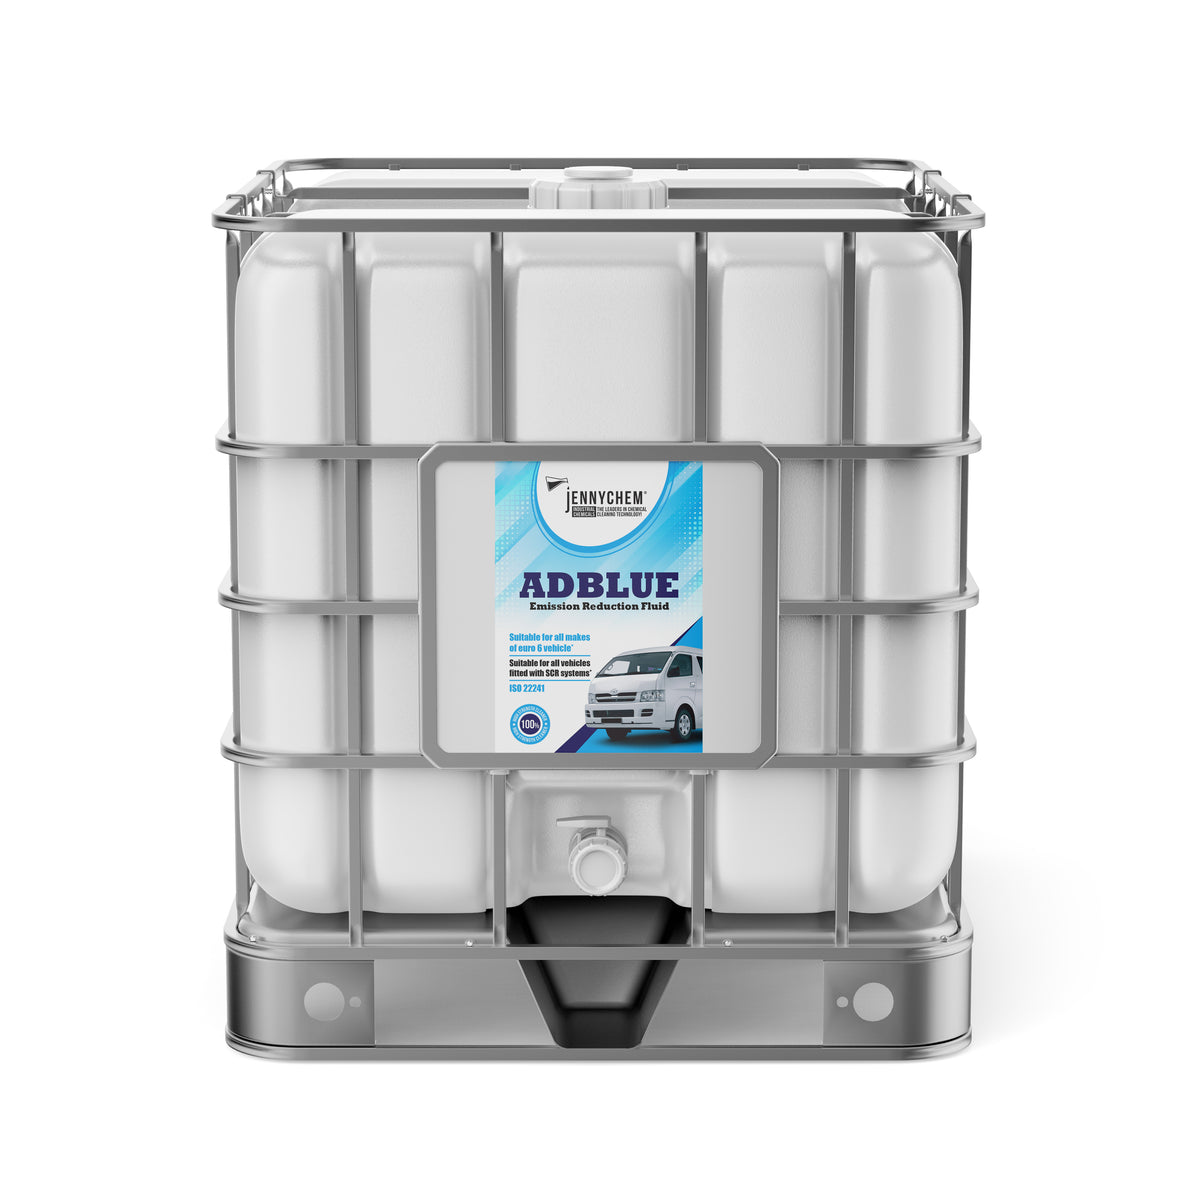 Adblue 20L With Integral Spout